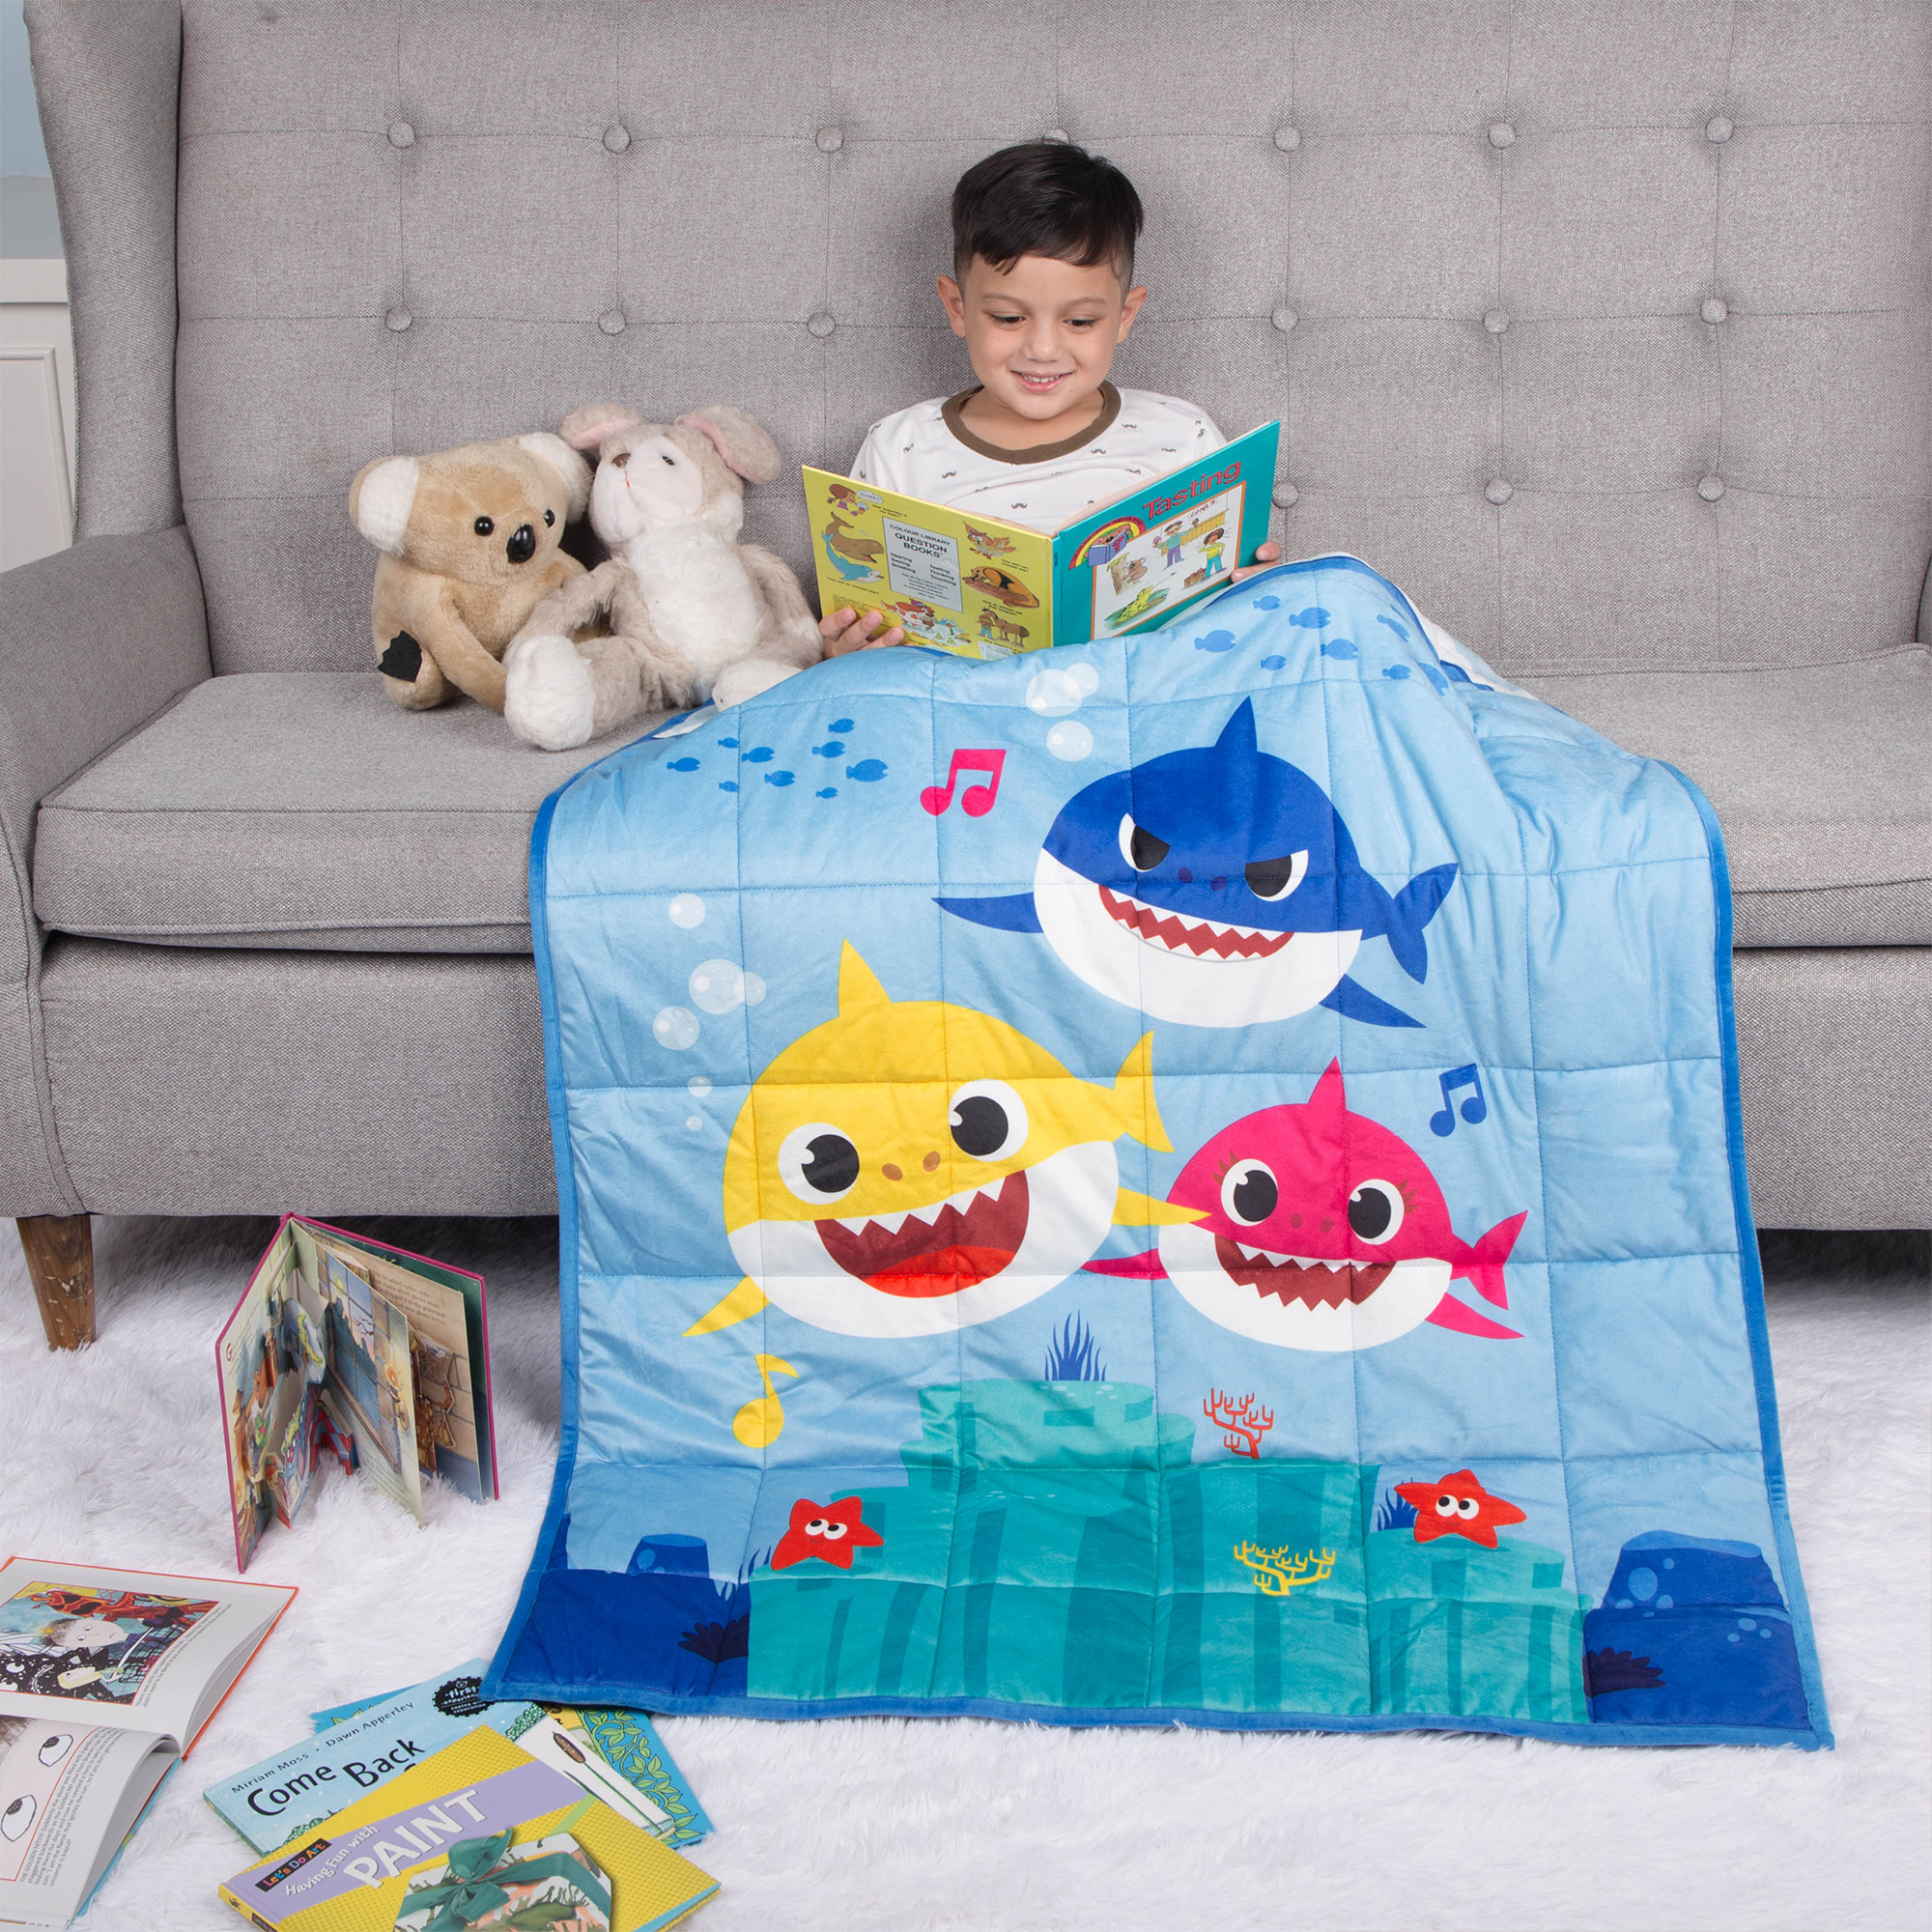 Baby Shark Kids Weighted Blanket, Super Soft Plush Bedding, 36" x 48" 4.5lbs, Blue - image 3 of 11